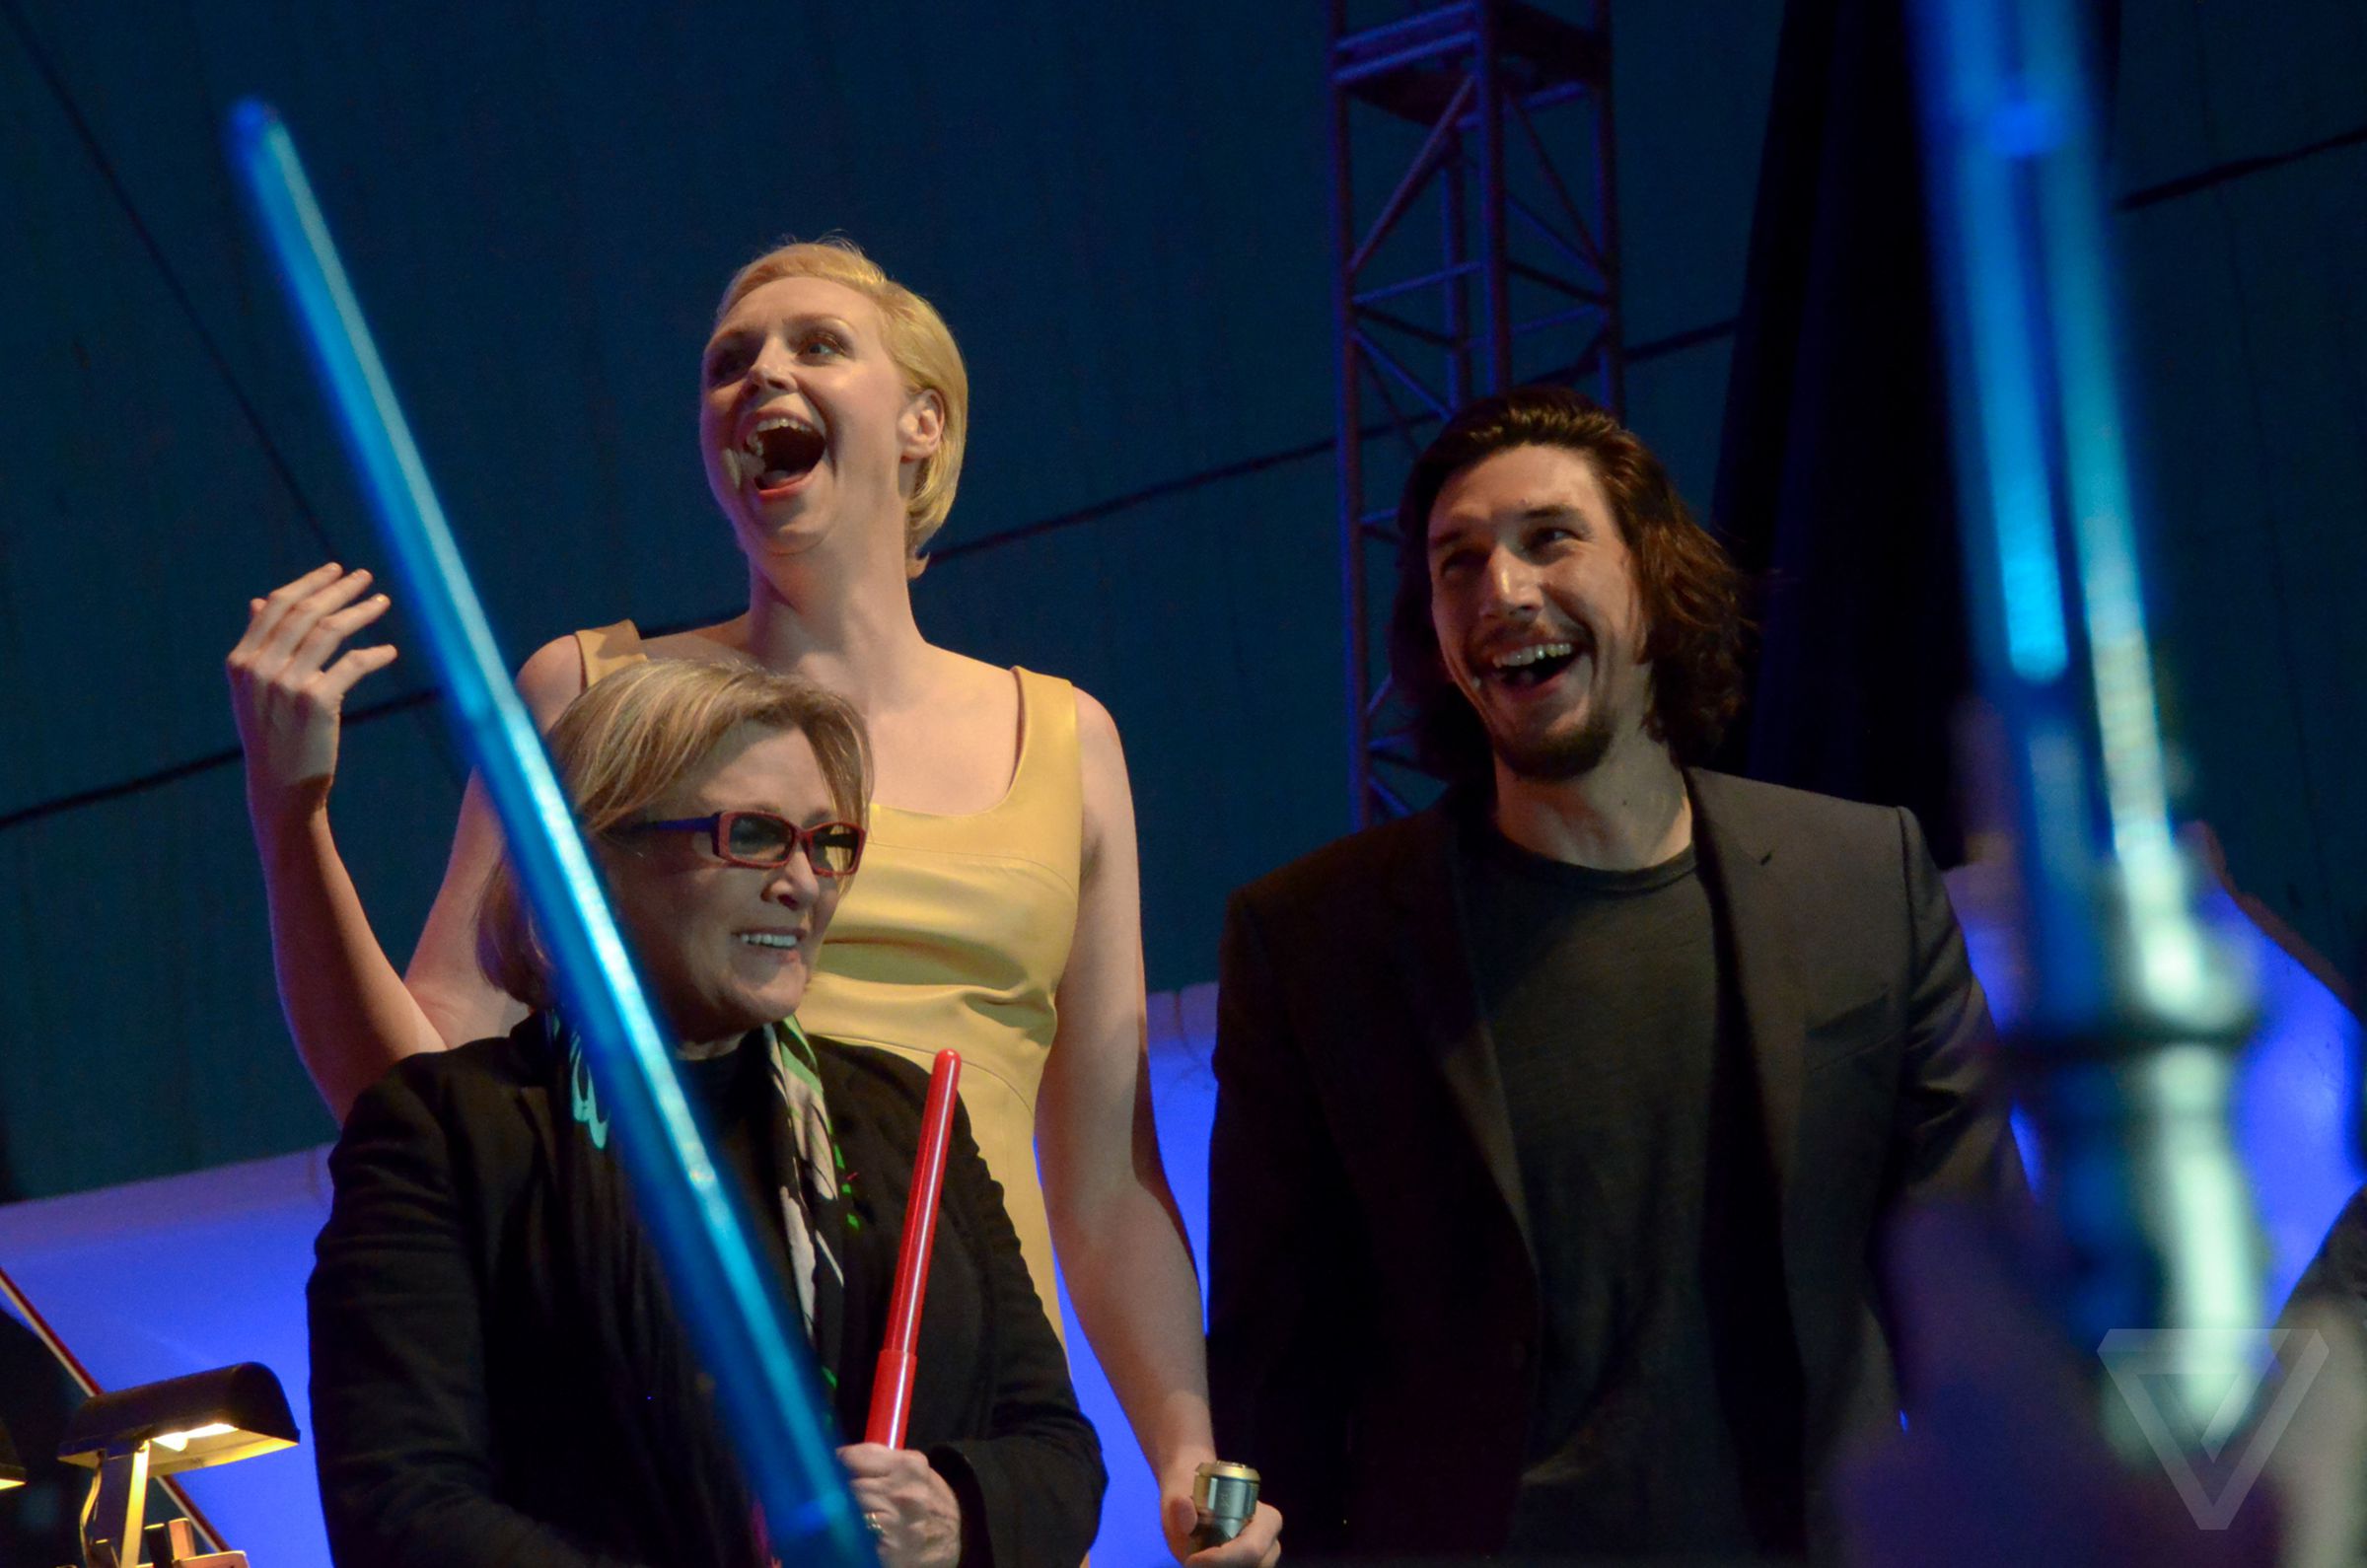 Star Wars Comic-Con concert images